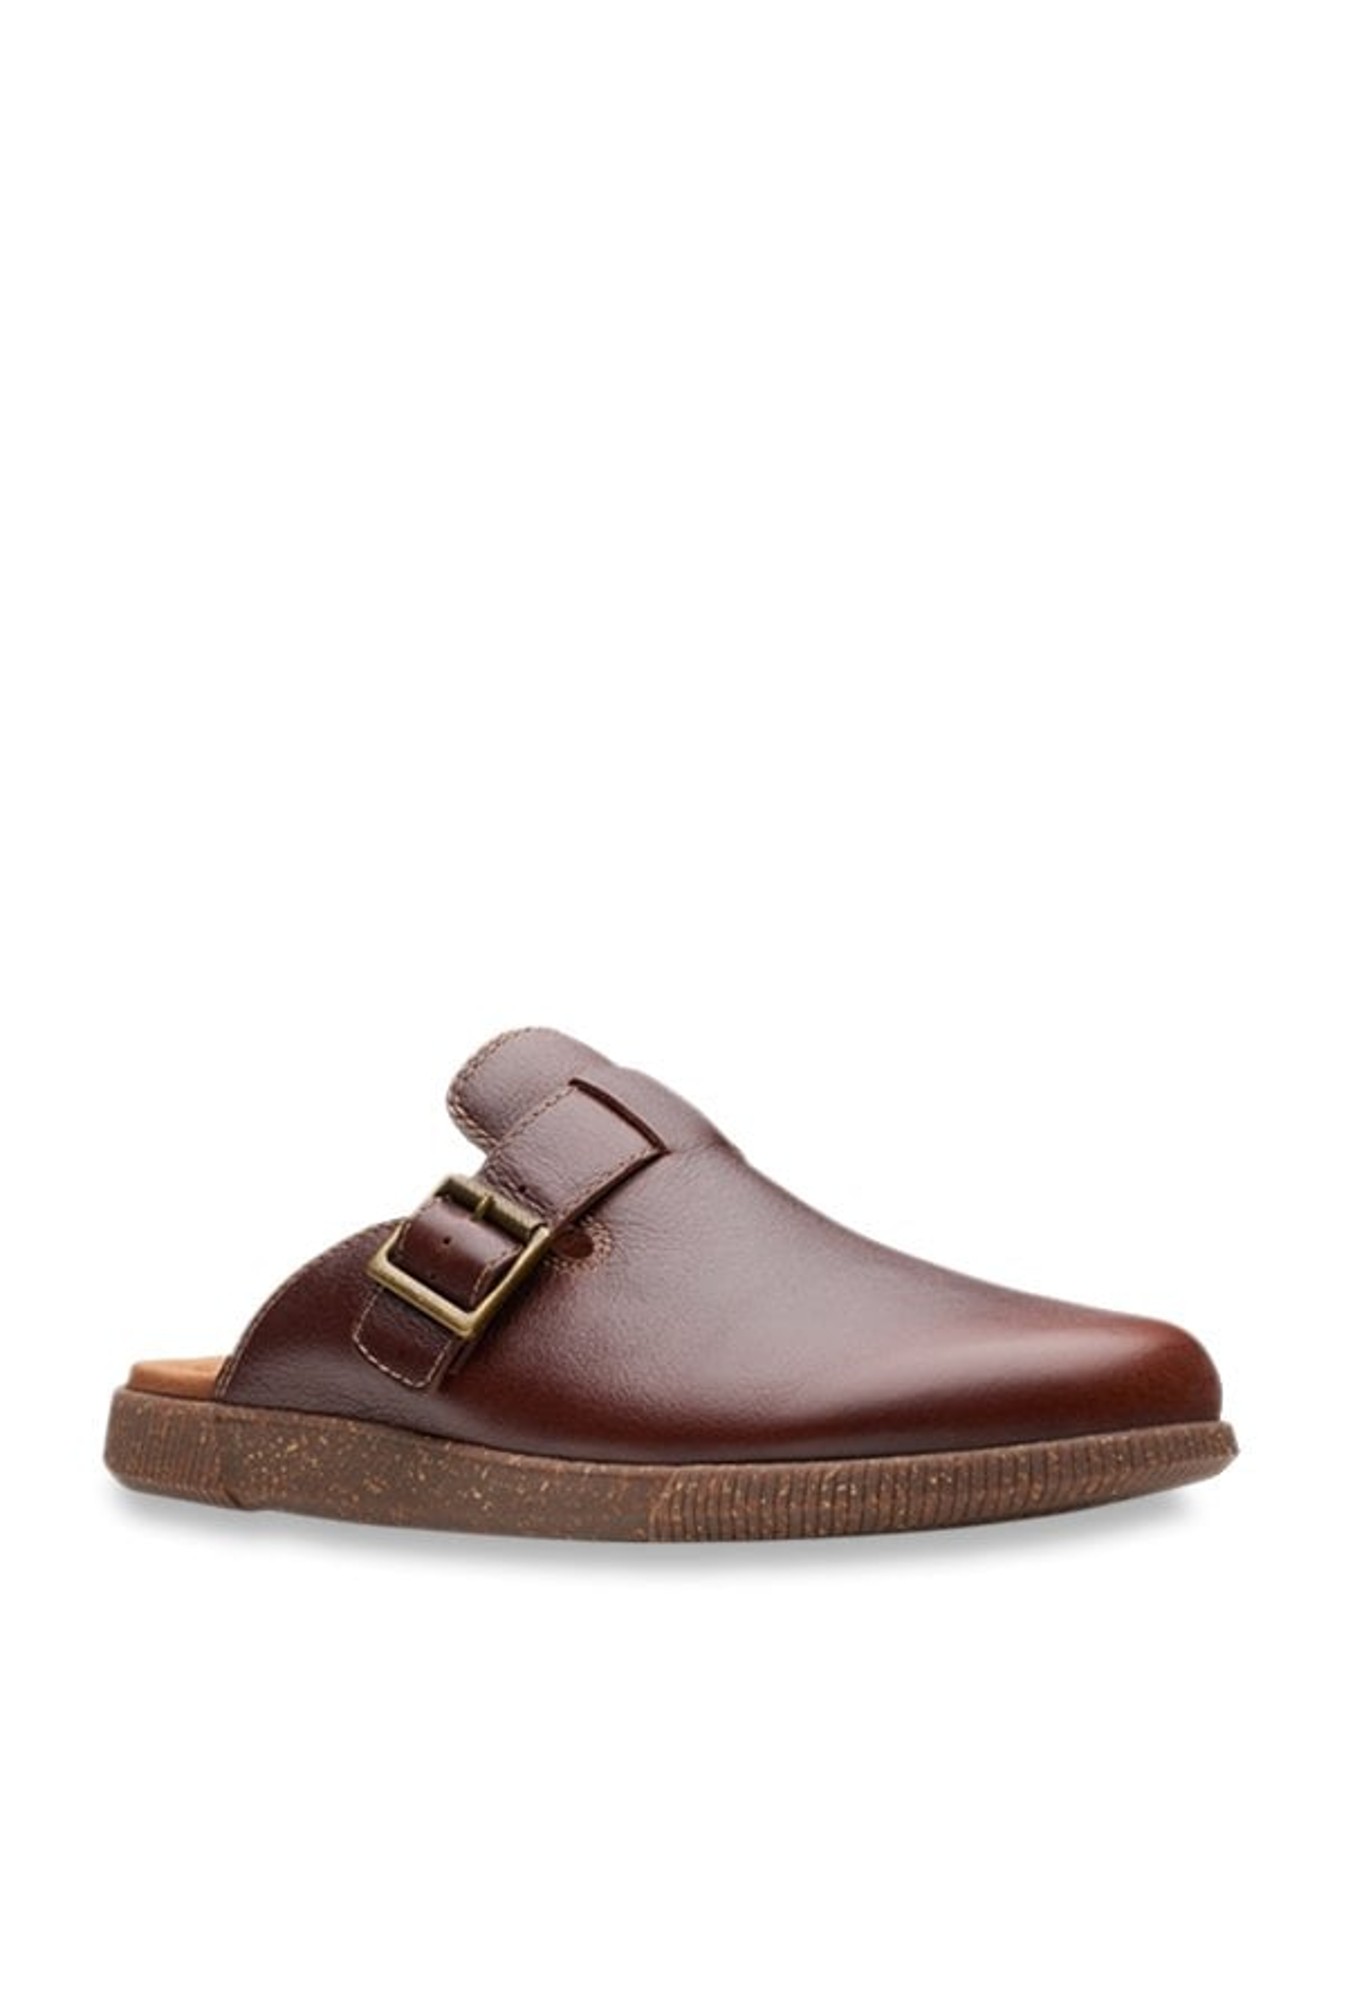 Clarks Vine Birch Brown Mule Shoes from 